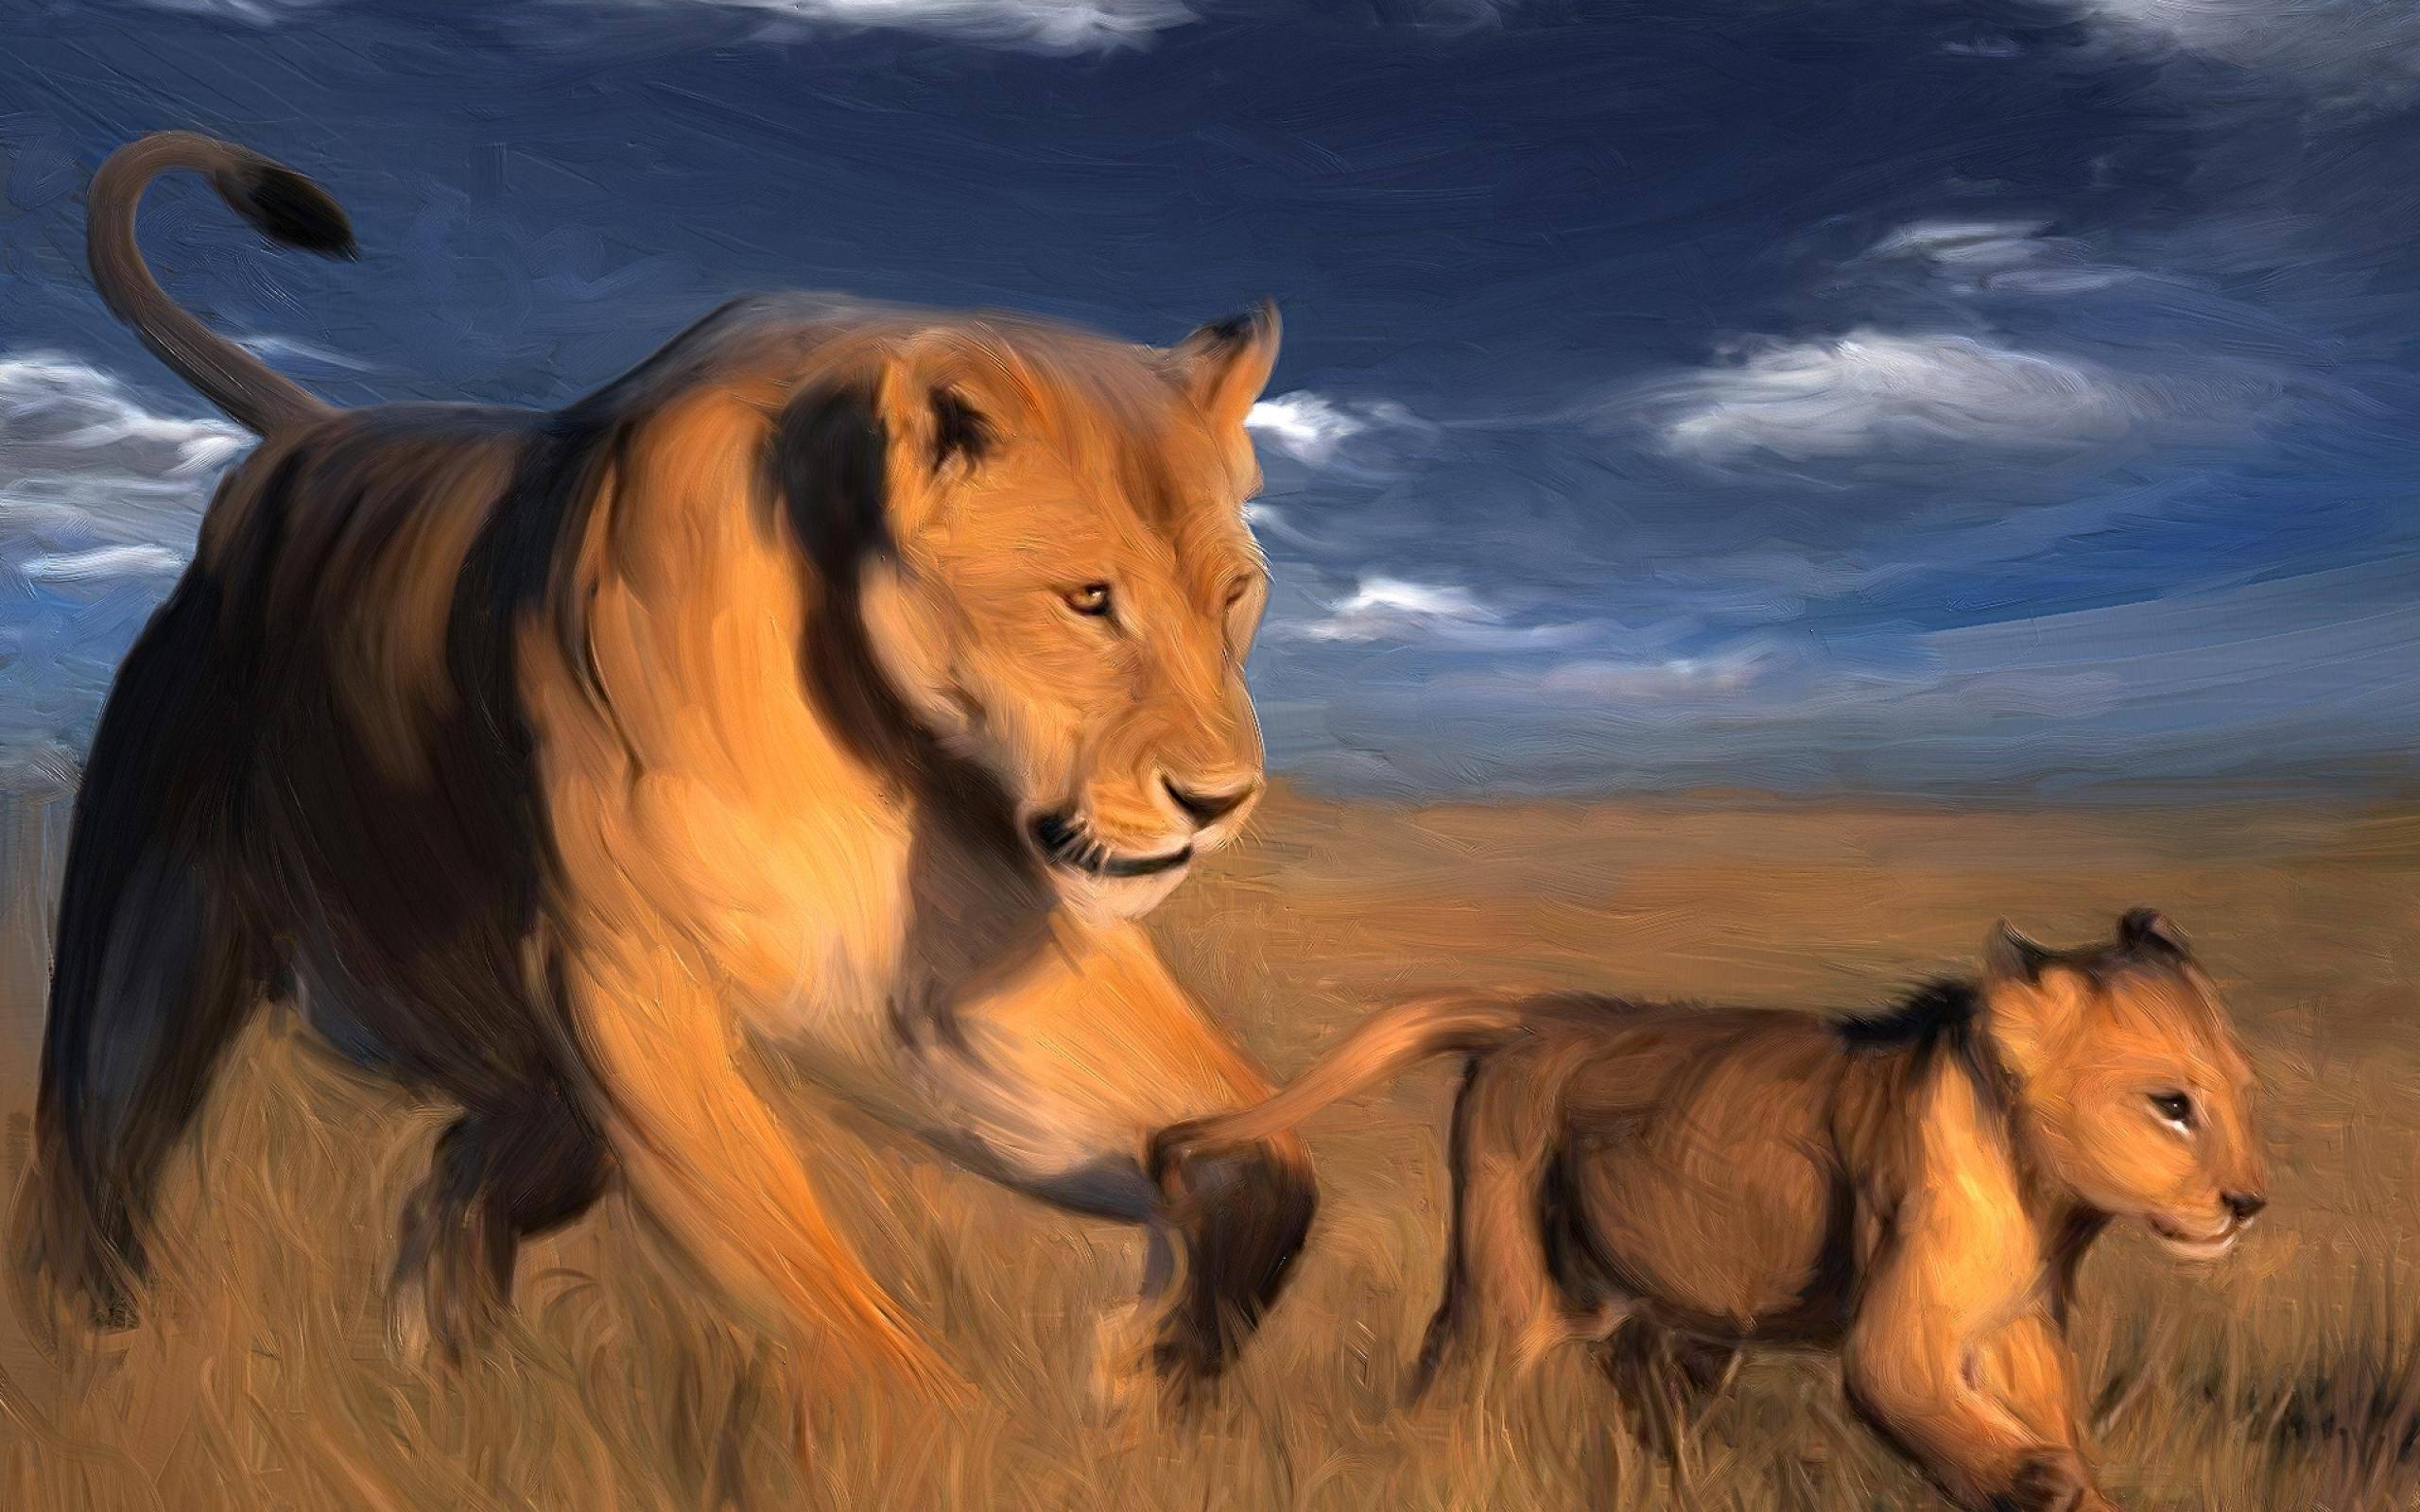 Wallpapers and the lioness family rendering on the desktop